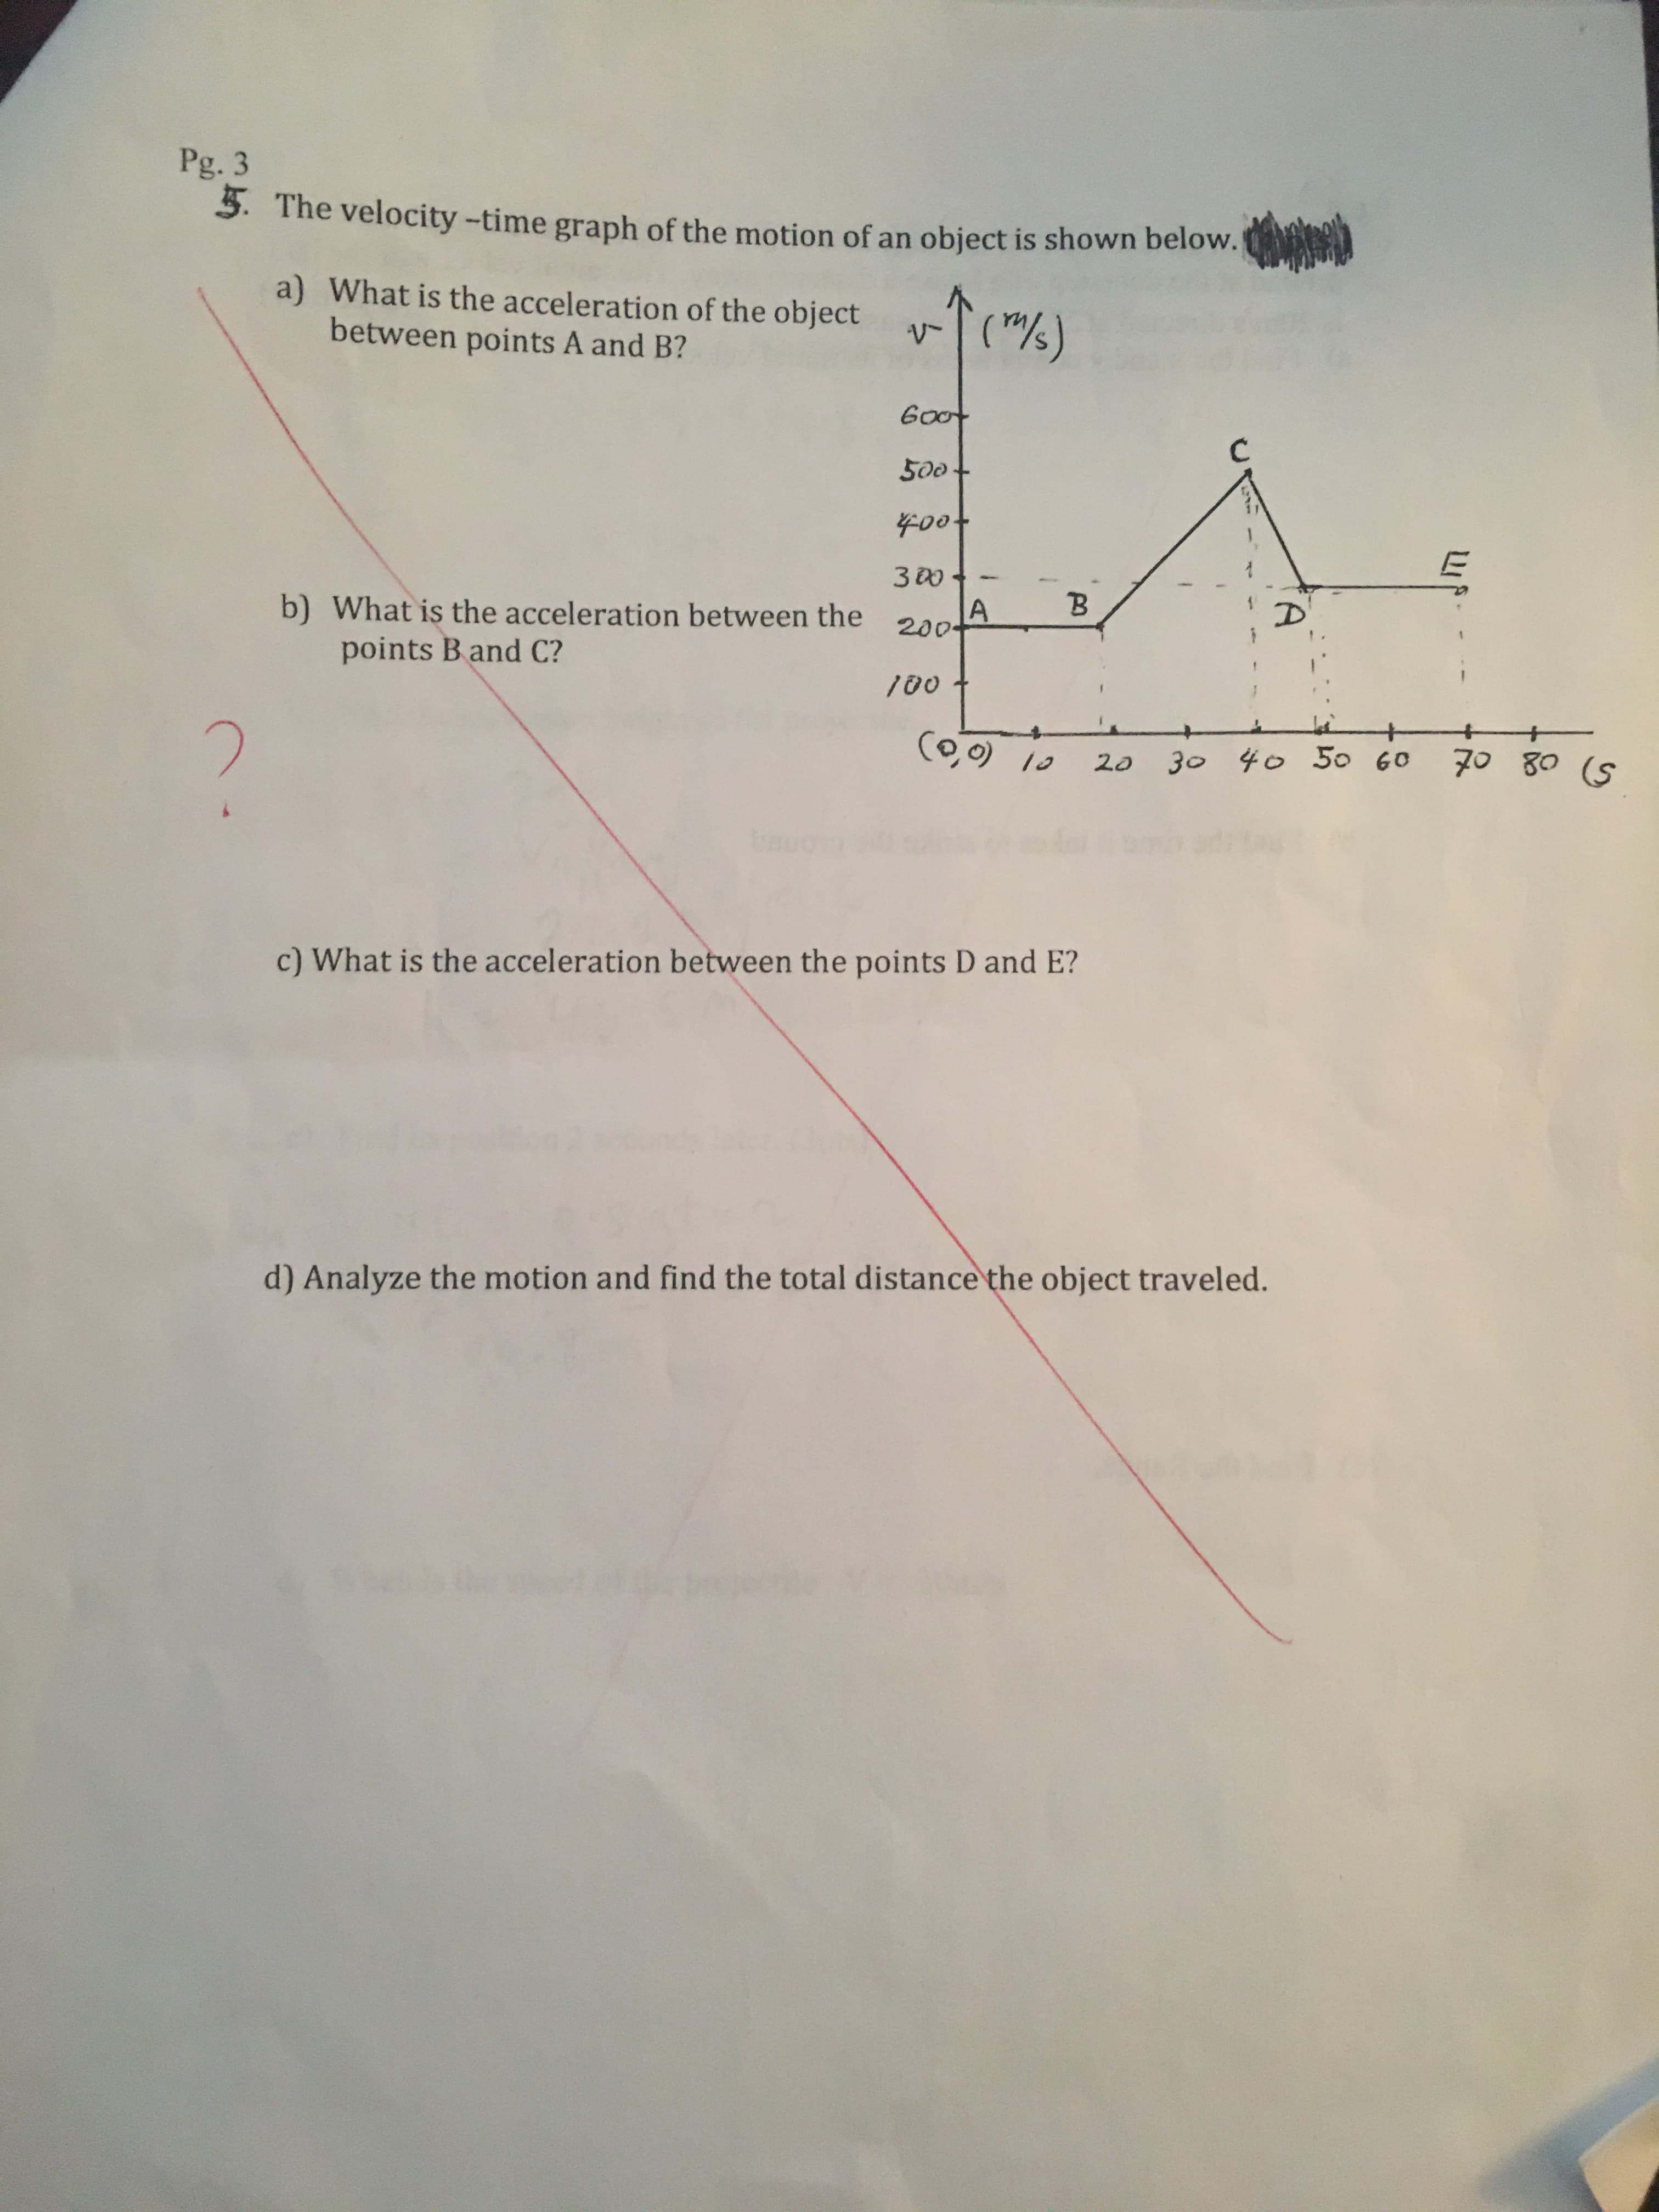 Pg. 3
3. The velocity -time graph of the motion of an object is shown below.
a) What is the acceleration of the object
between points A and B?
("/)
Goot
500
400t
з0
B.
b) What is the acceleration between the
points B and C?
200-
100
(0,0) 10
70 80 (S
30 40 50 60
c) What is the acceleration between the points D and E?
d) Analyze the motion and find the total distance the object traveled.
